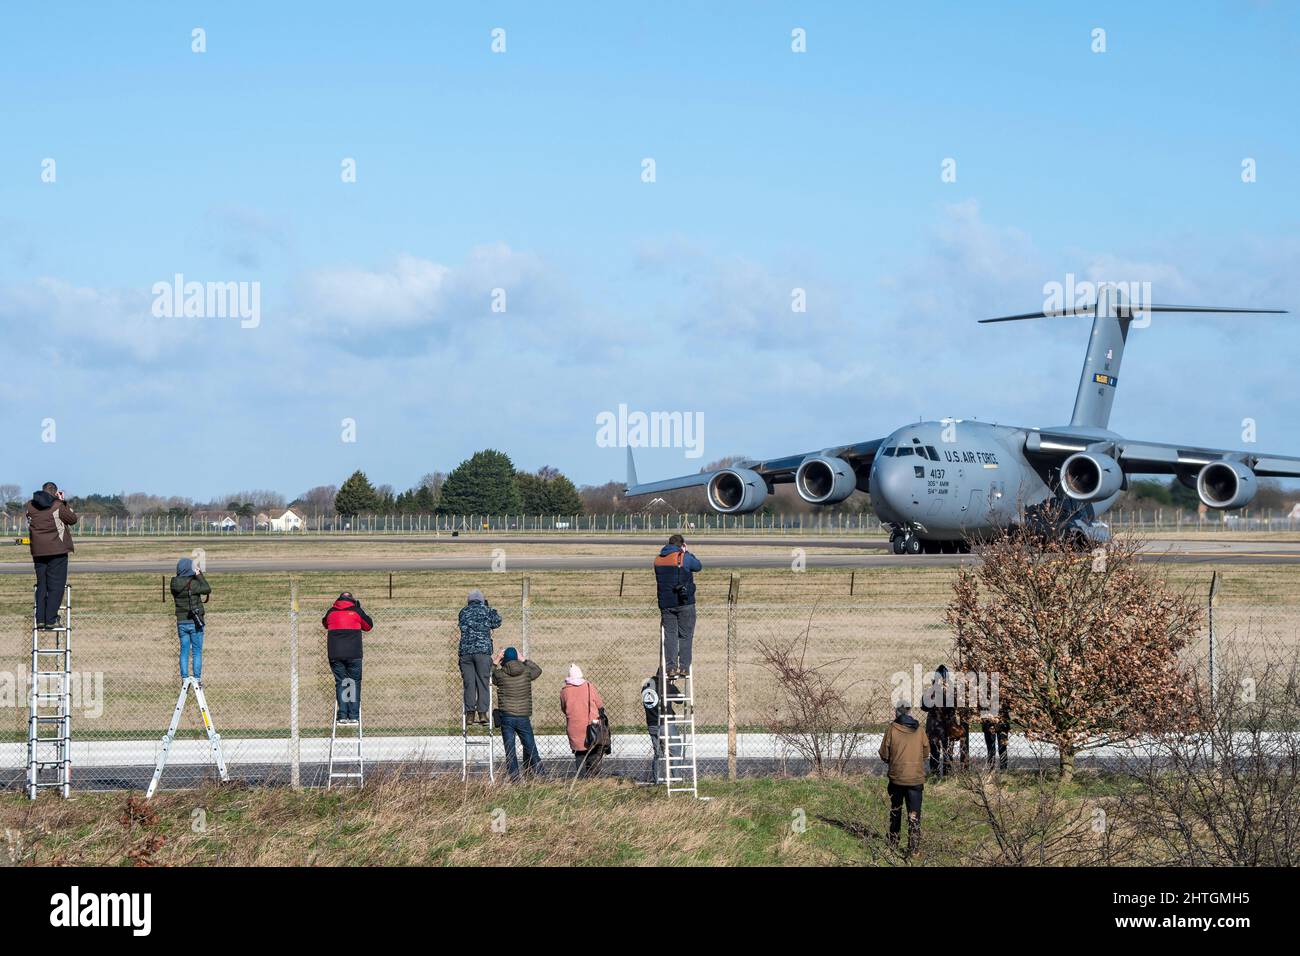 Plane spotters at Mildehall Air Field taking pictures of  Boeing C-17 Globemaster III taxi-ing Stock Photo